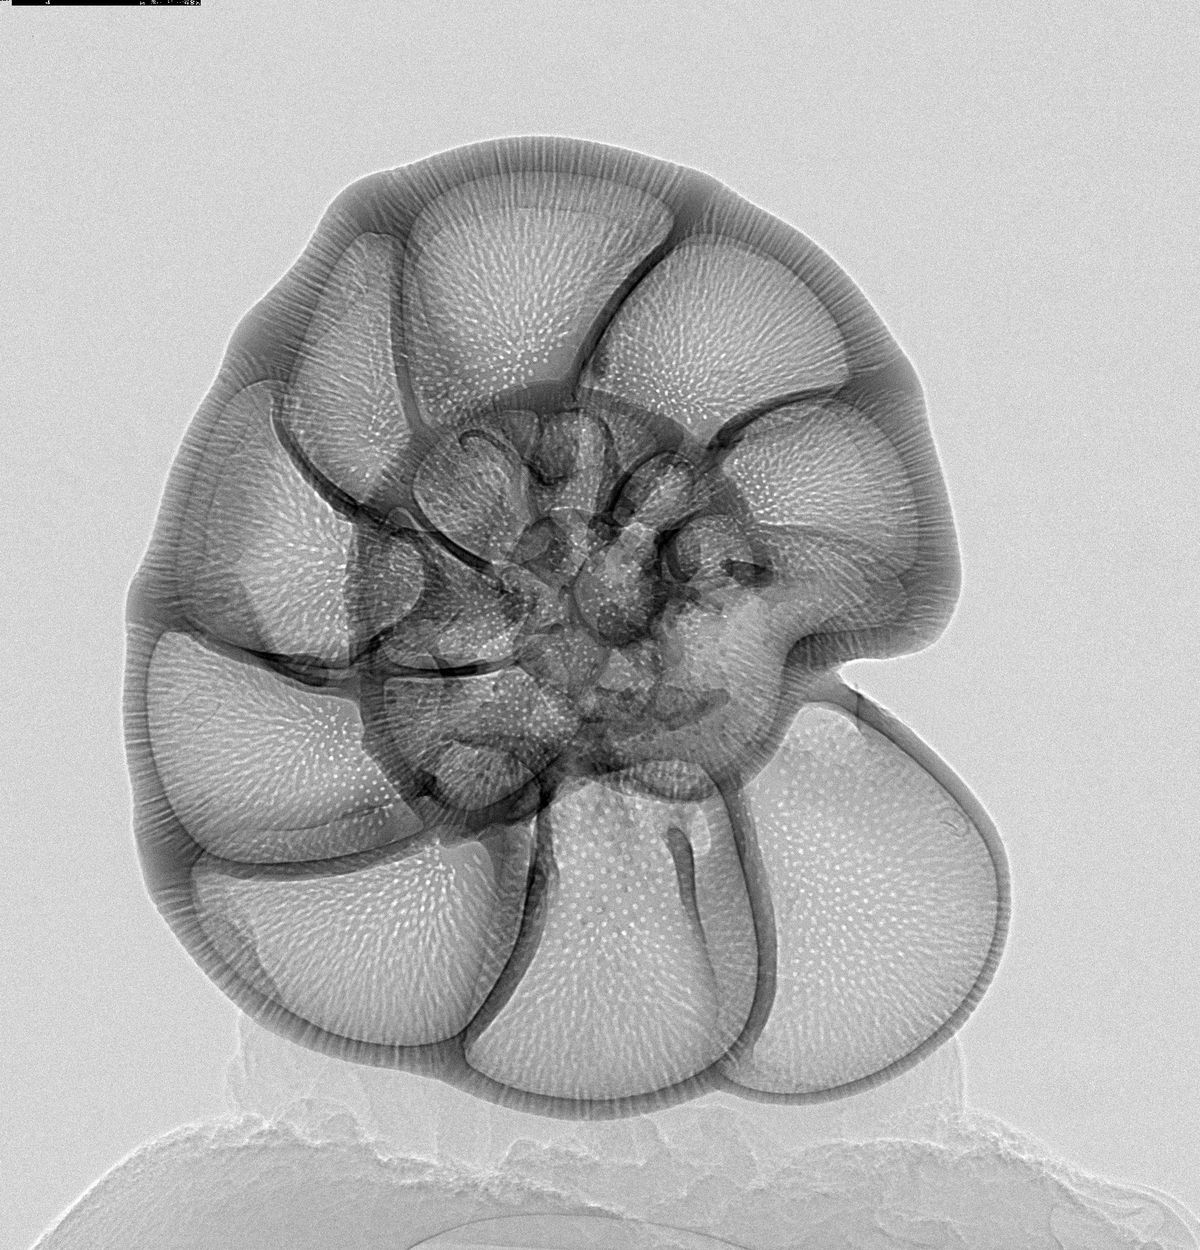 A normalised projection image of A. tepida, a type of Foraminifera